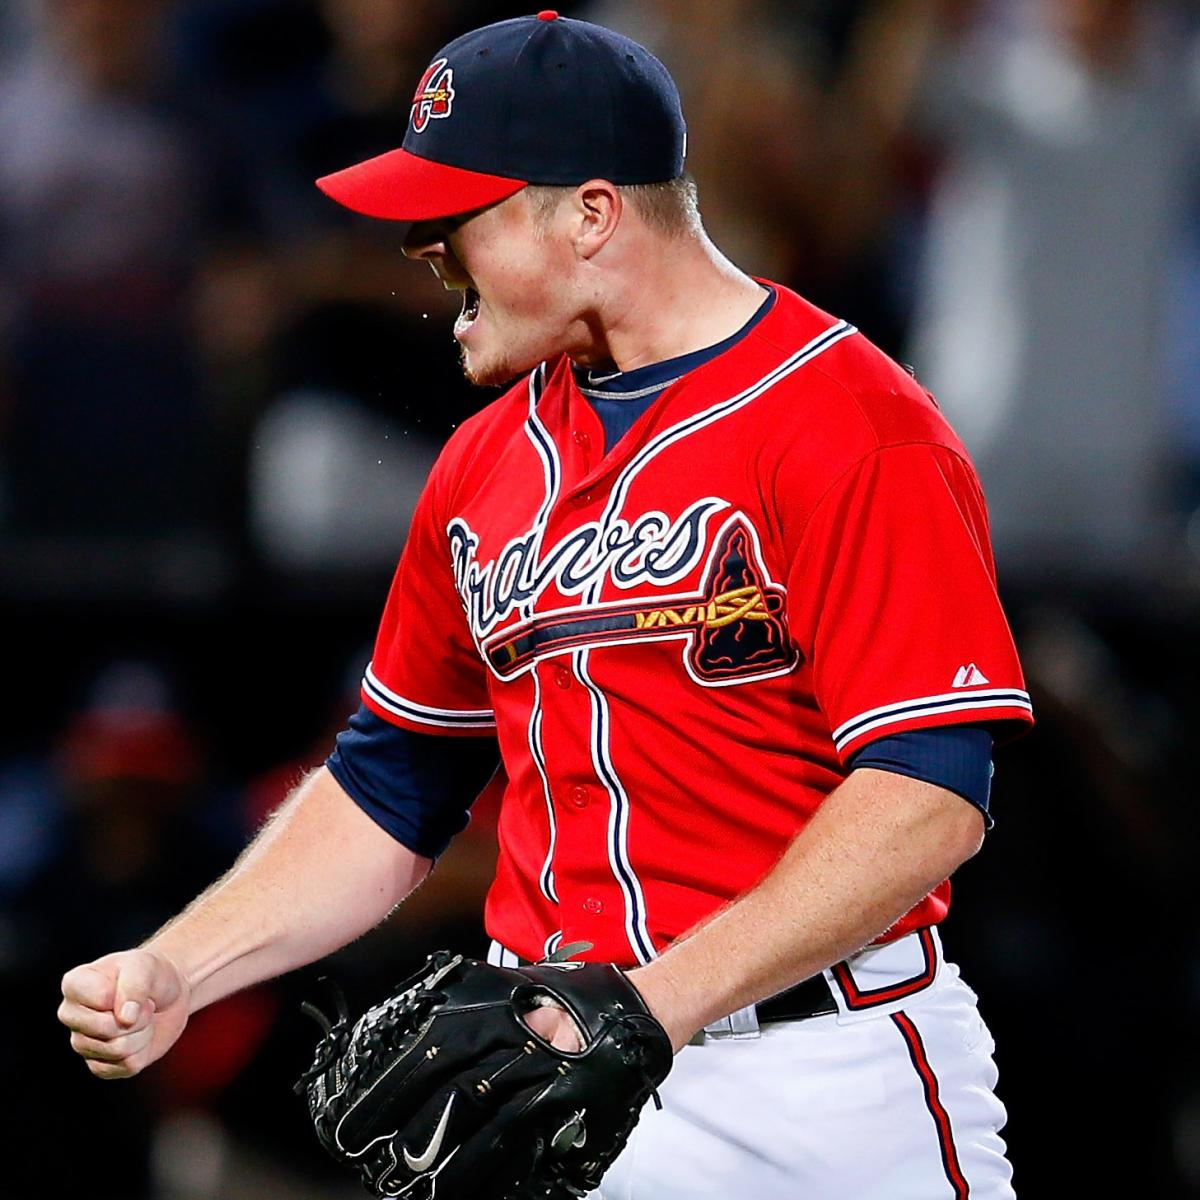 Craig Kimbrel nearly unhittable in Braves' batting practice